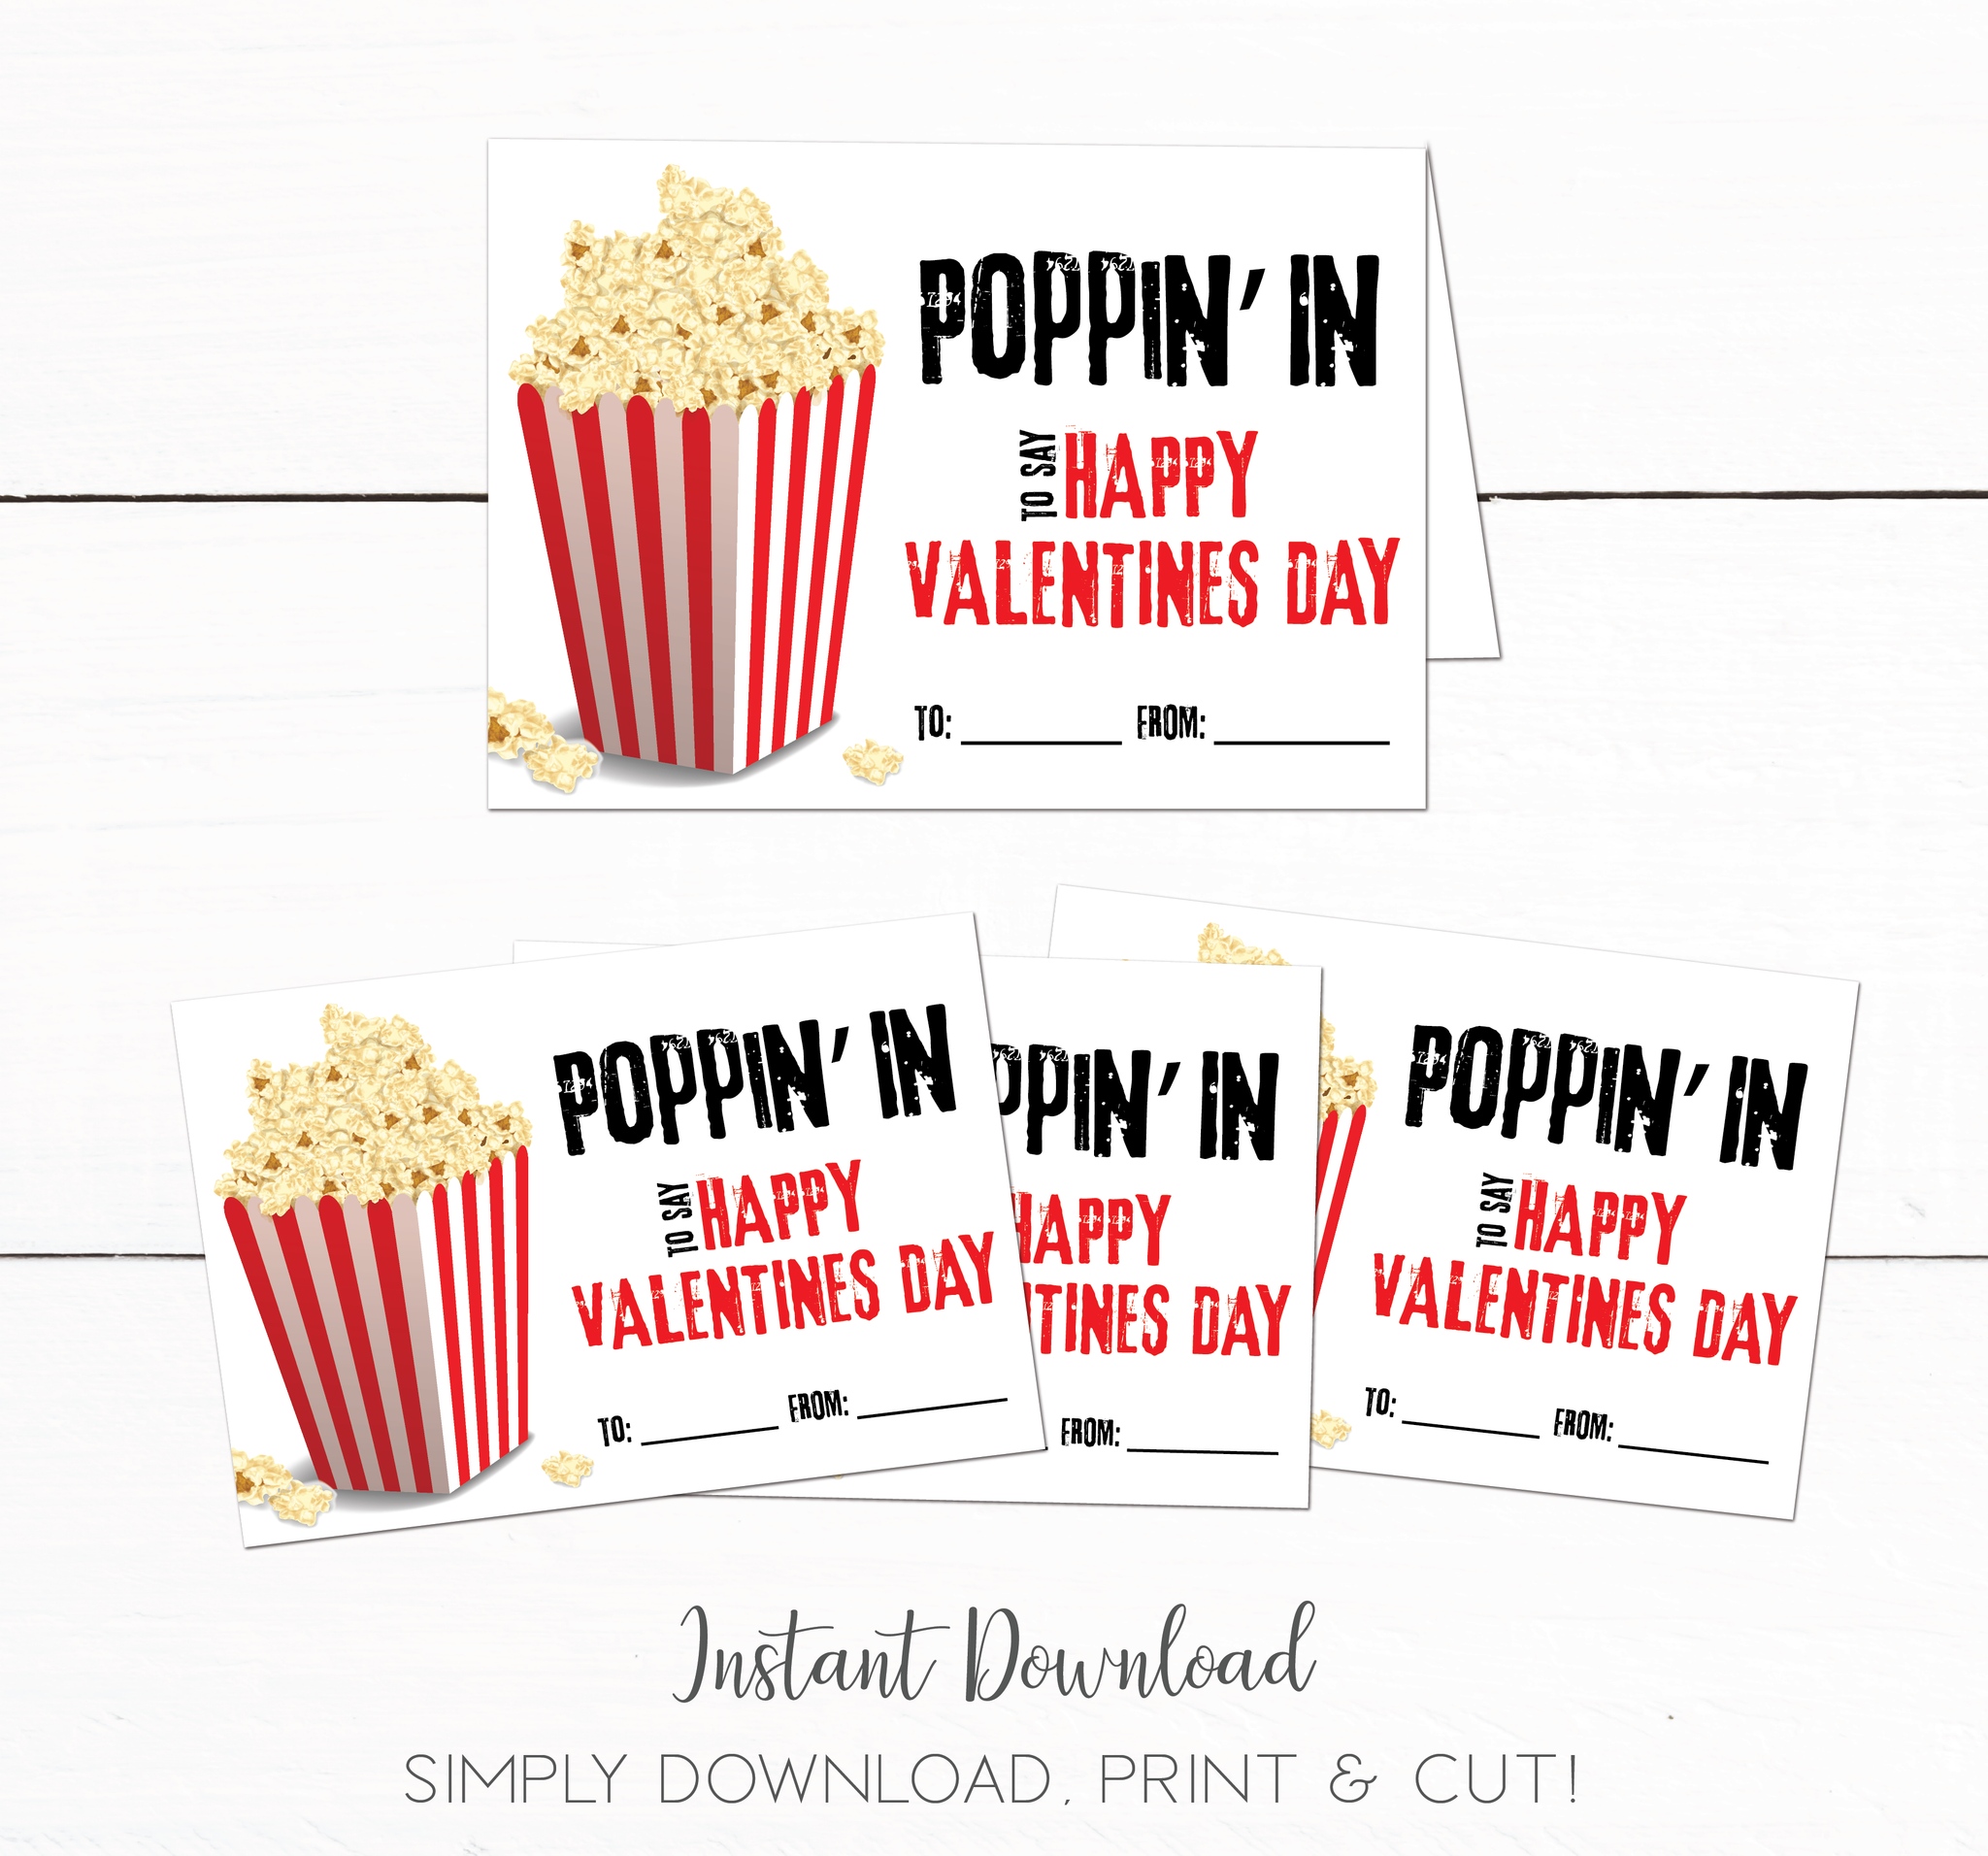 Kids Popcorn Printable School Party Valentines Day Cards